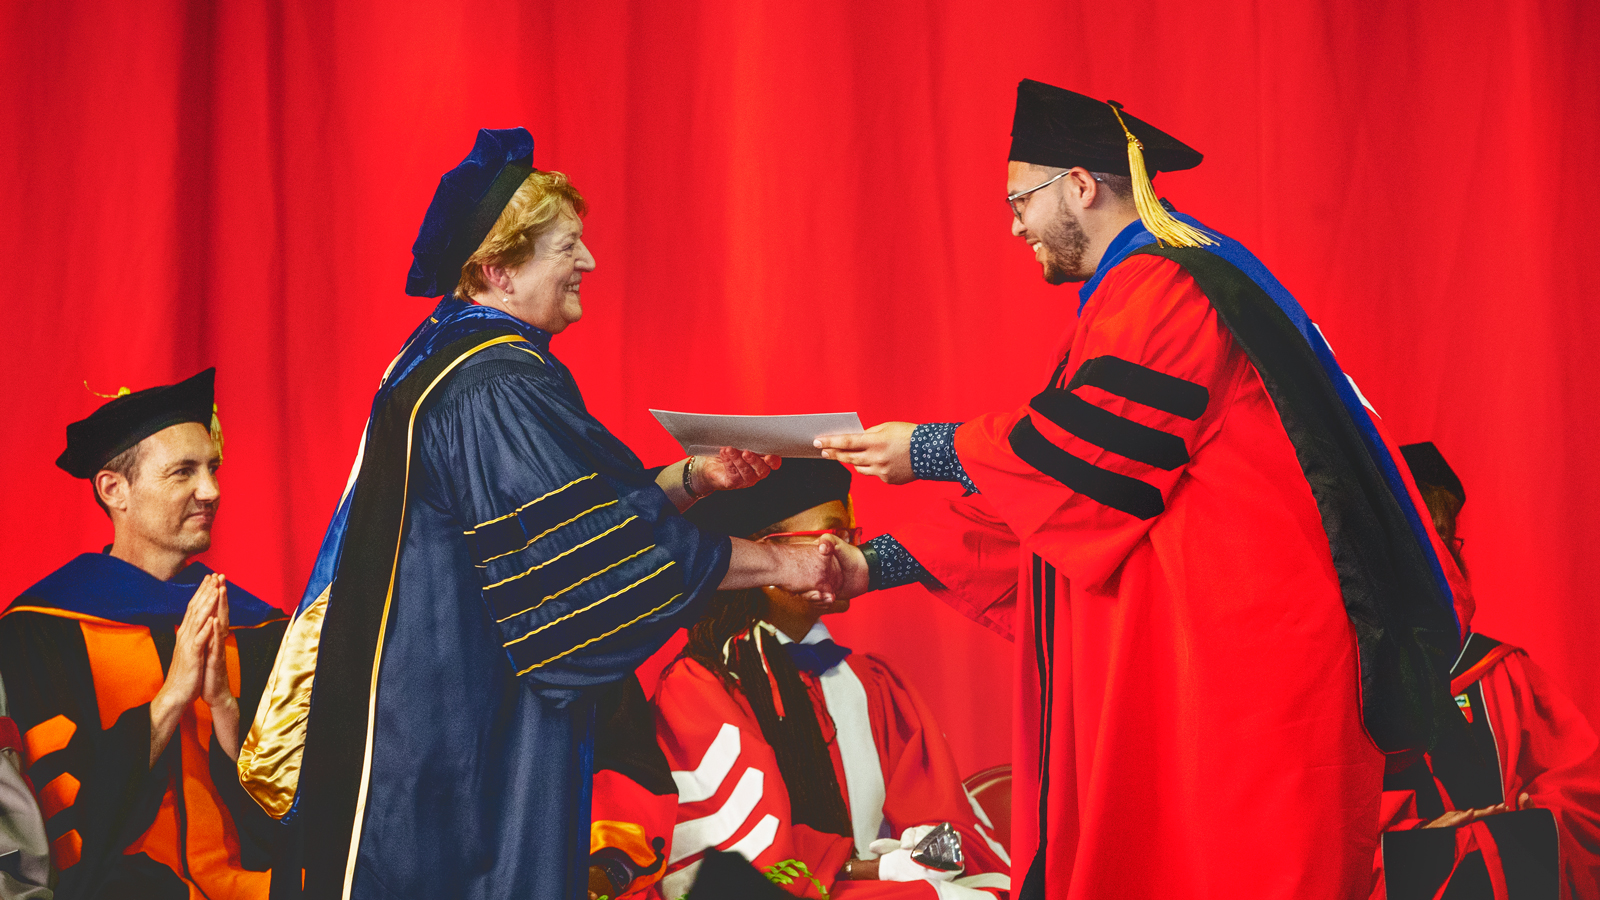 Kathryn Boor ’80, dean of the Graduate School and vice provost for graduate education, congratulates a successful Ph.D. candidate